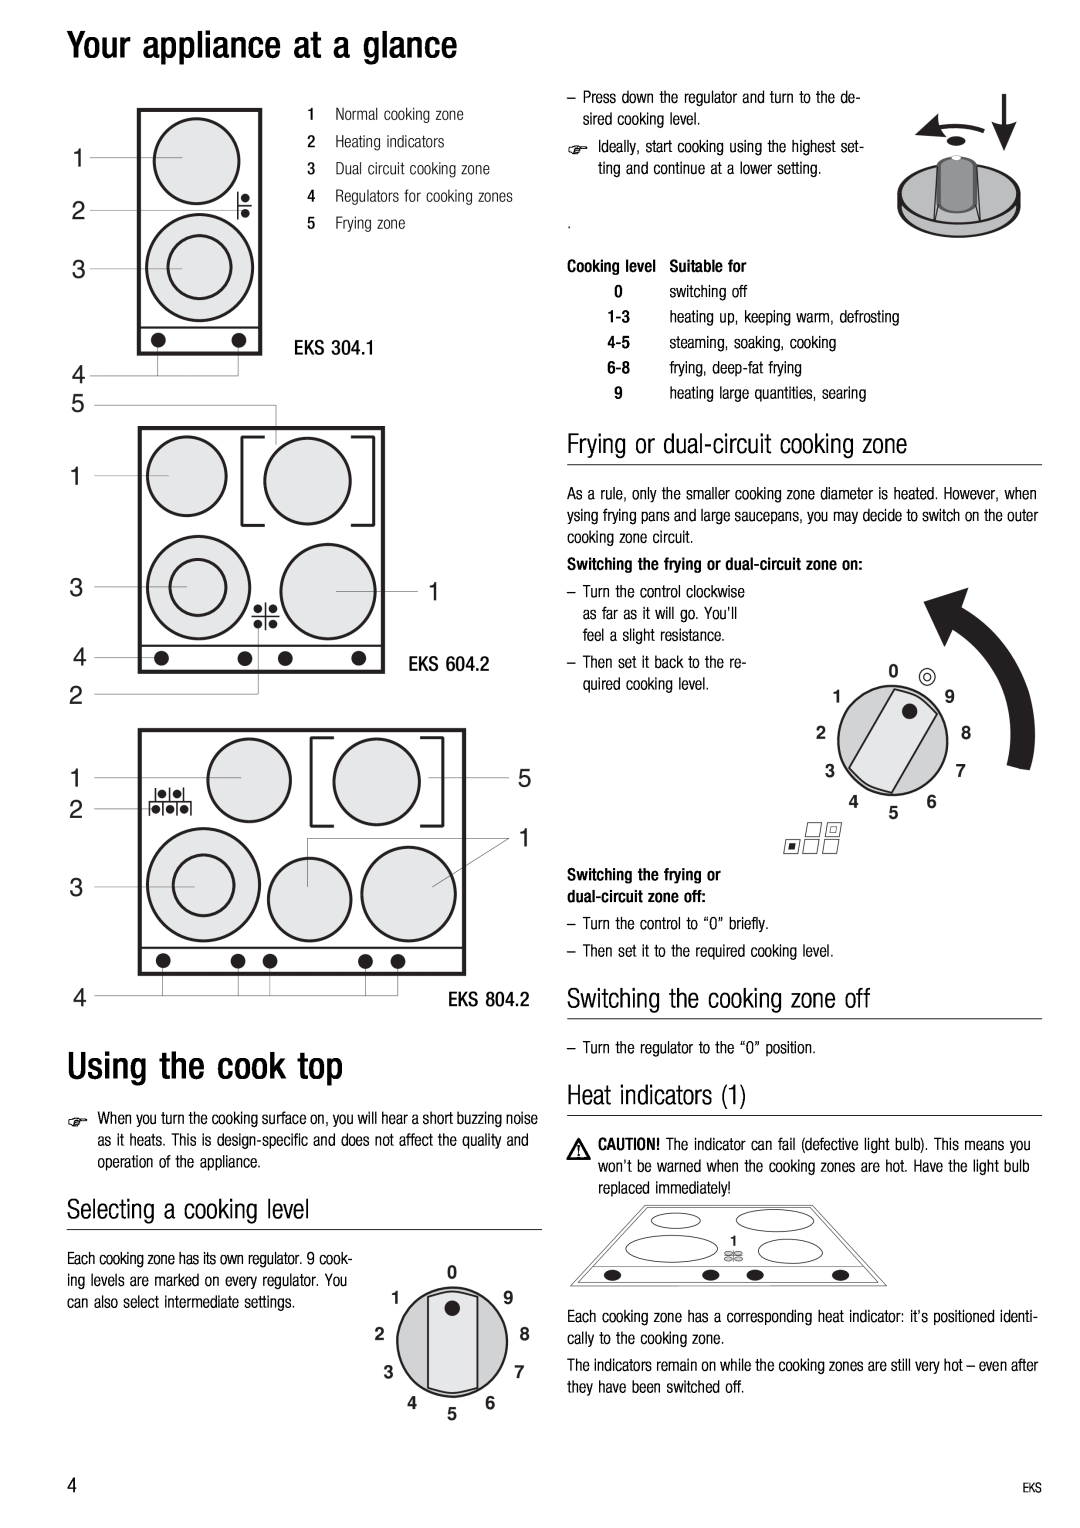 Kuppersbusch USA EKS 804.2 Your appliance at a glance, Using the cook top, Frying or dual-circuitcooking zone, Eks Eks 